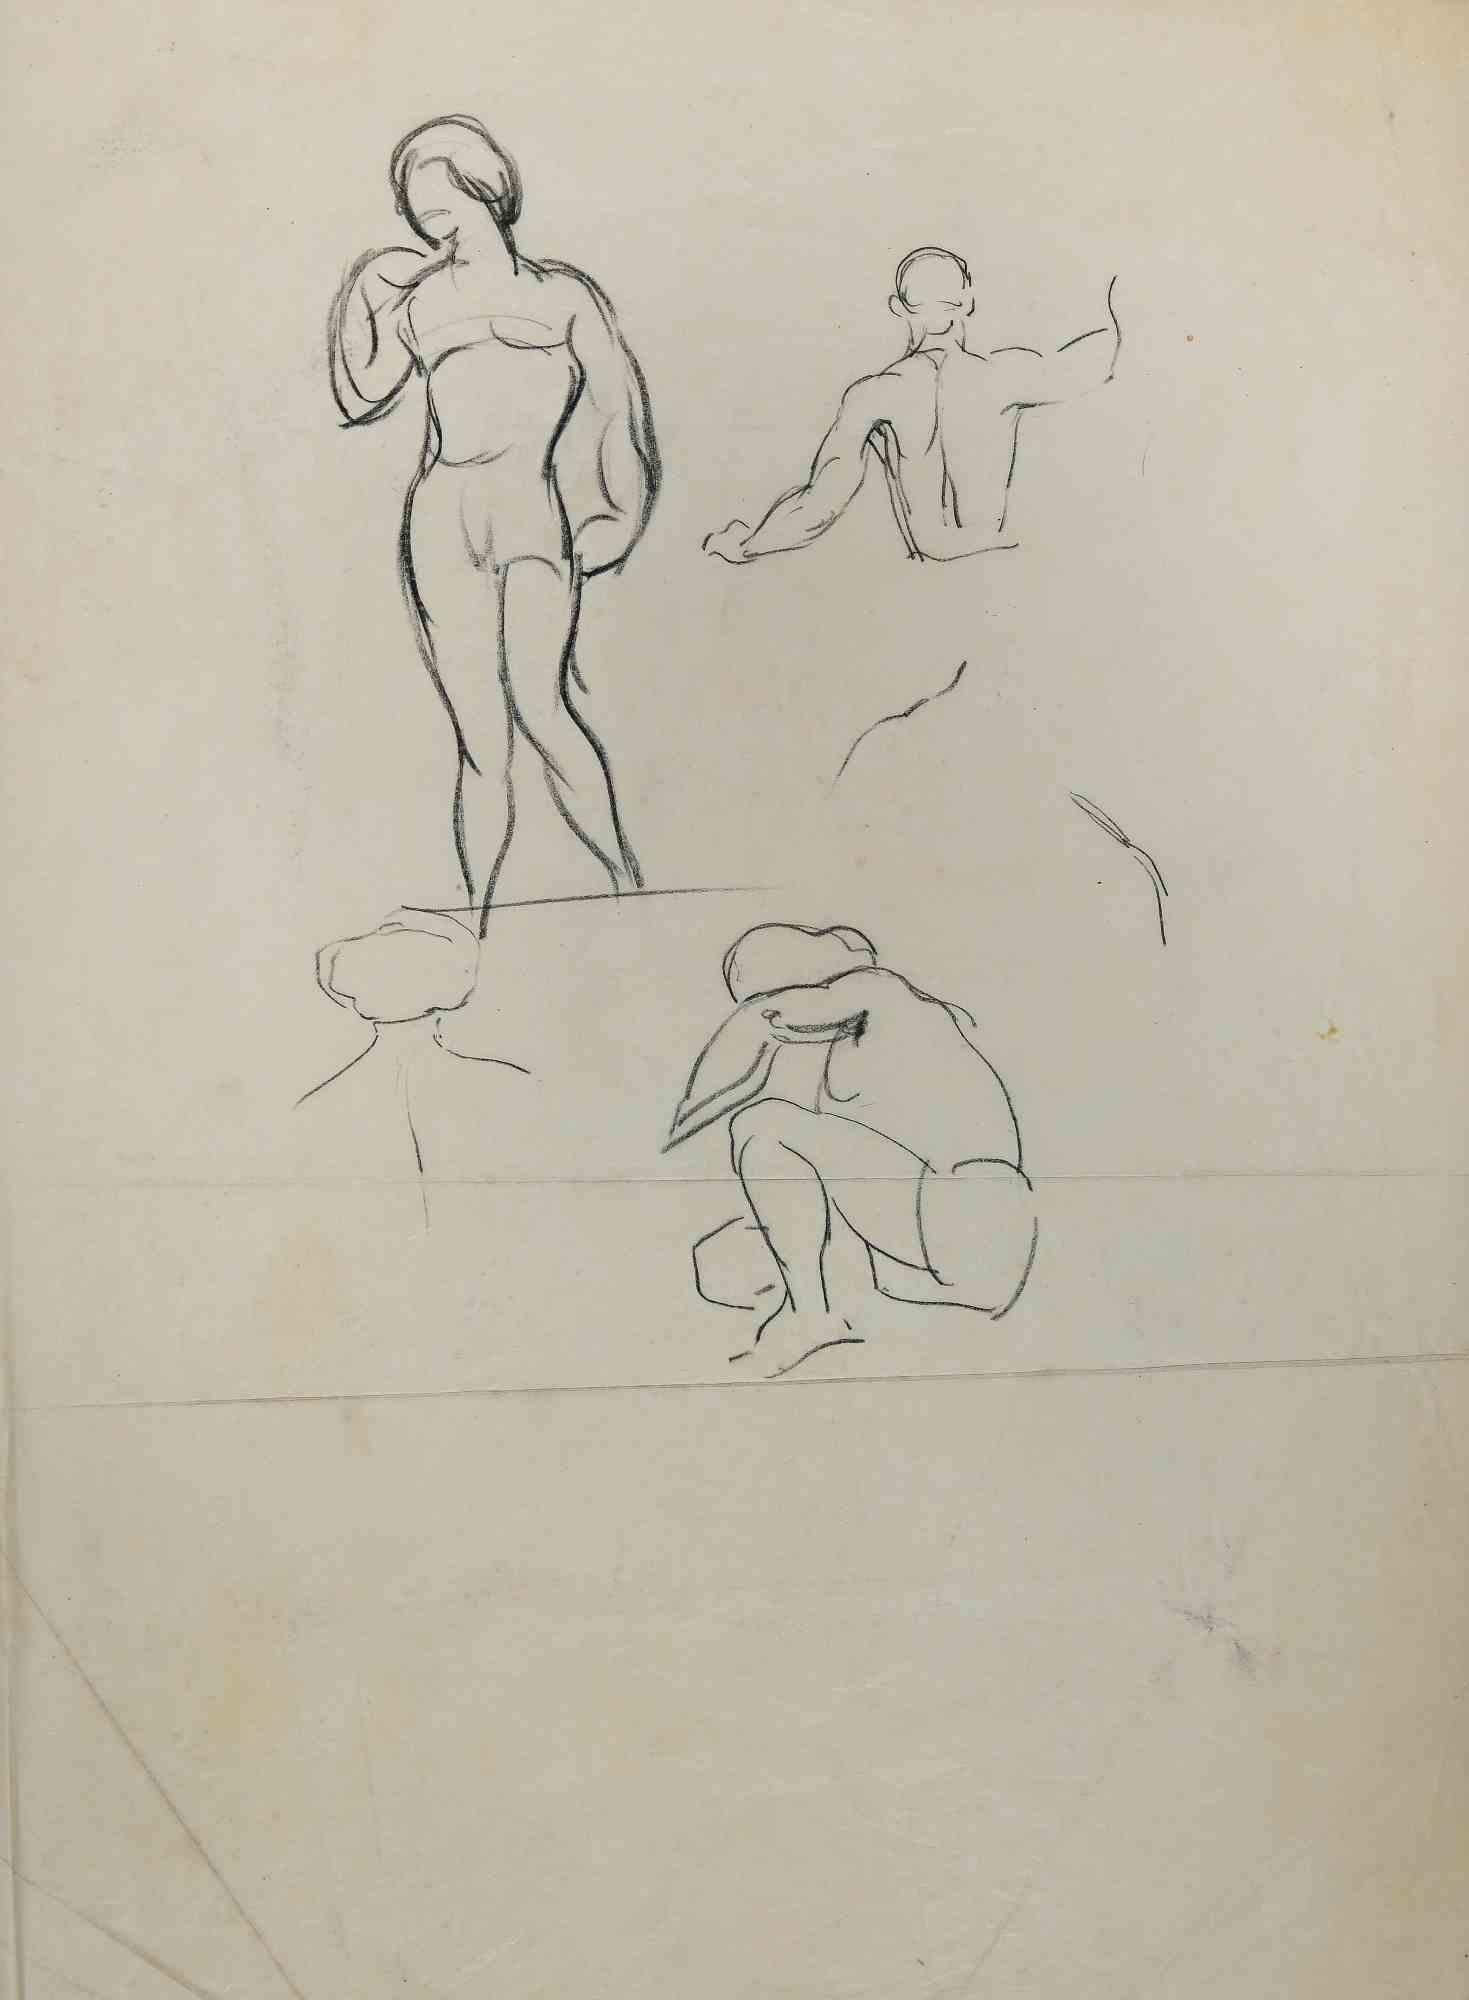 Figures  - Pencil Drawing - Mid 20th century